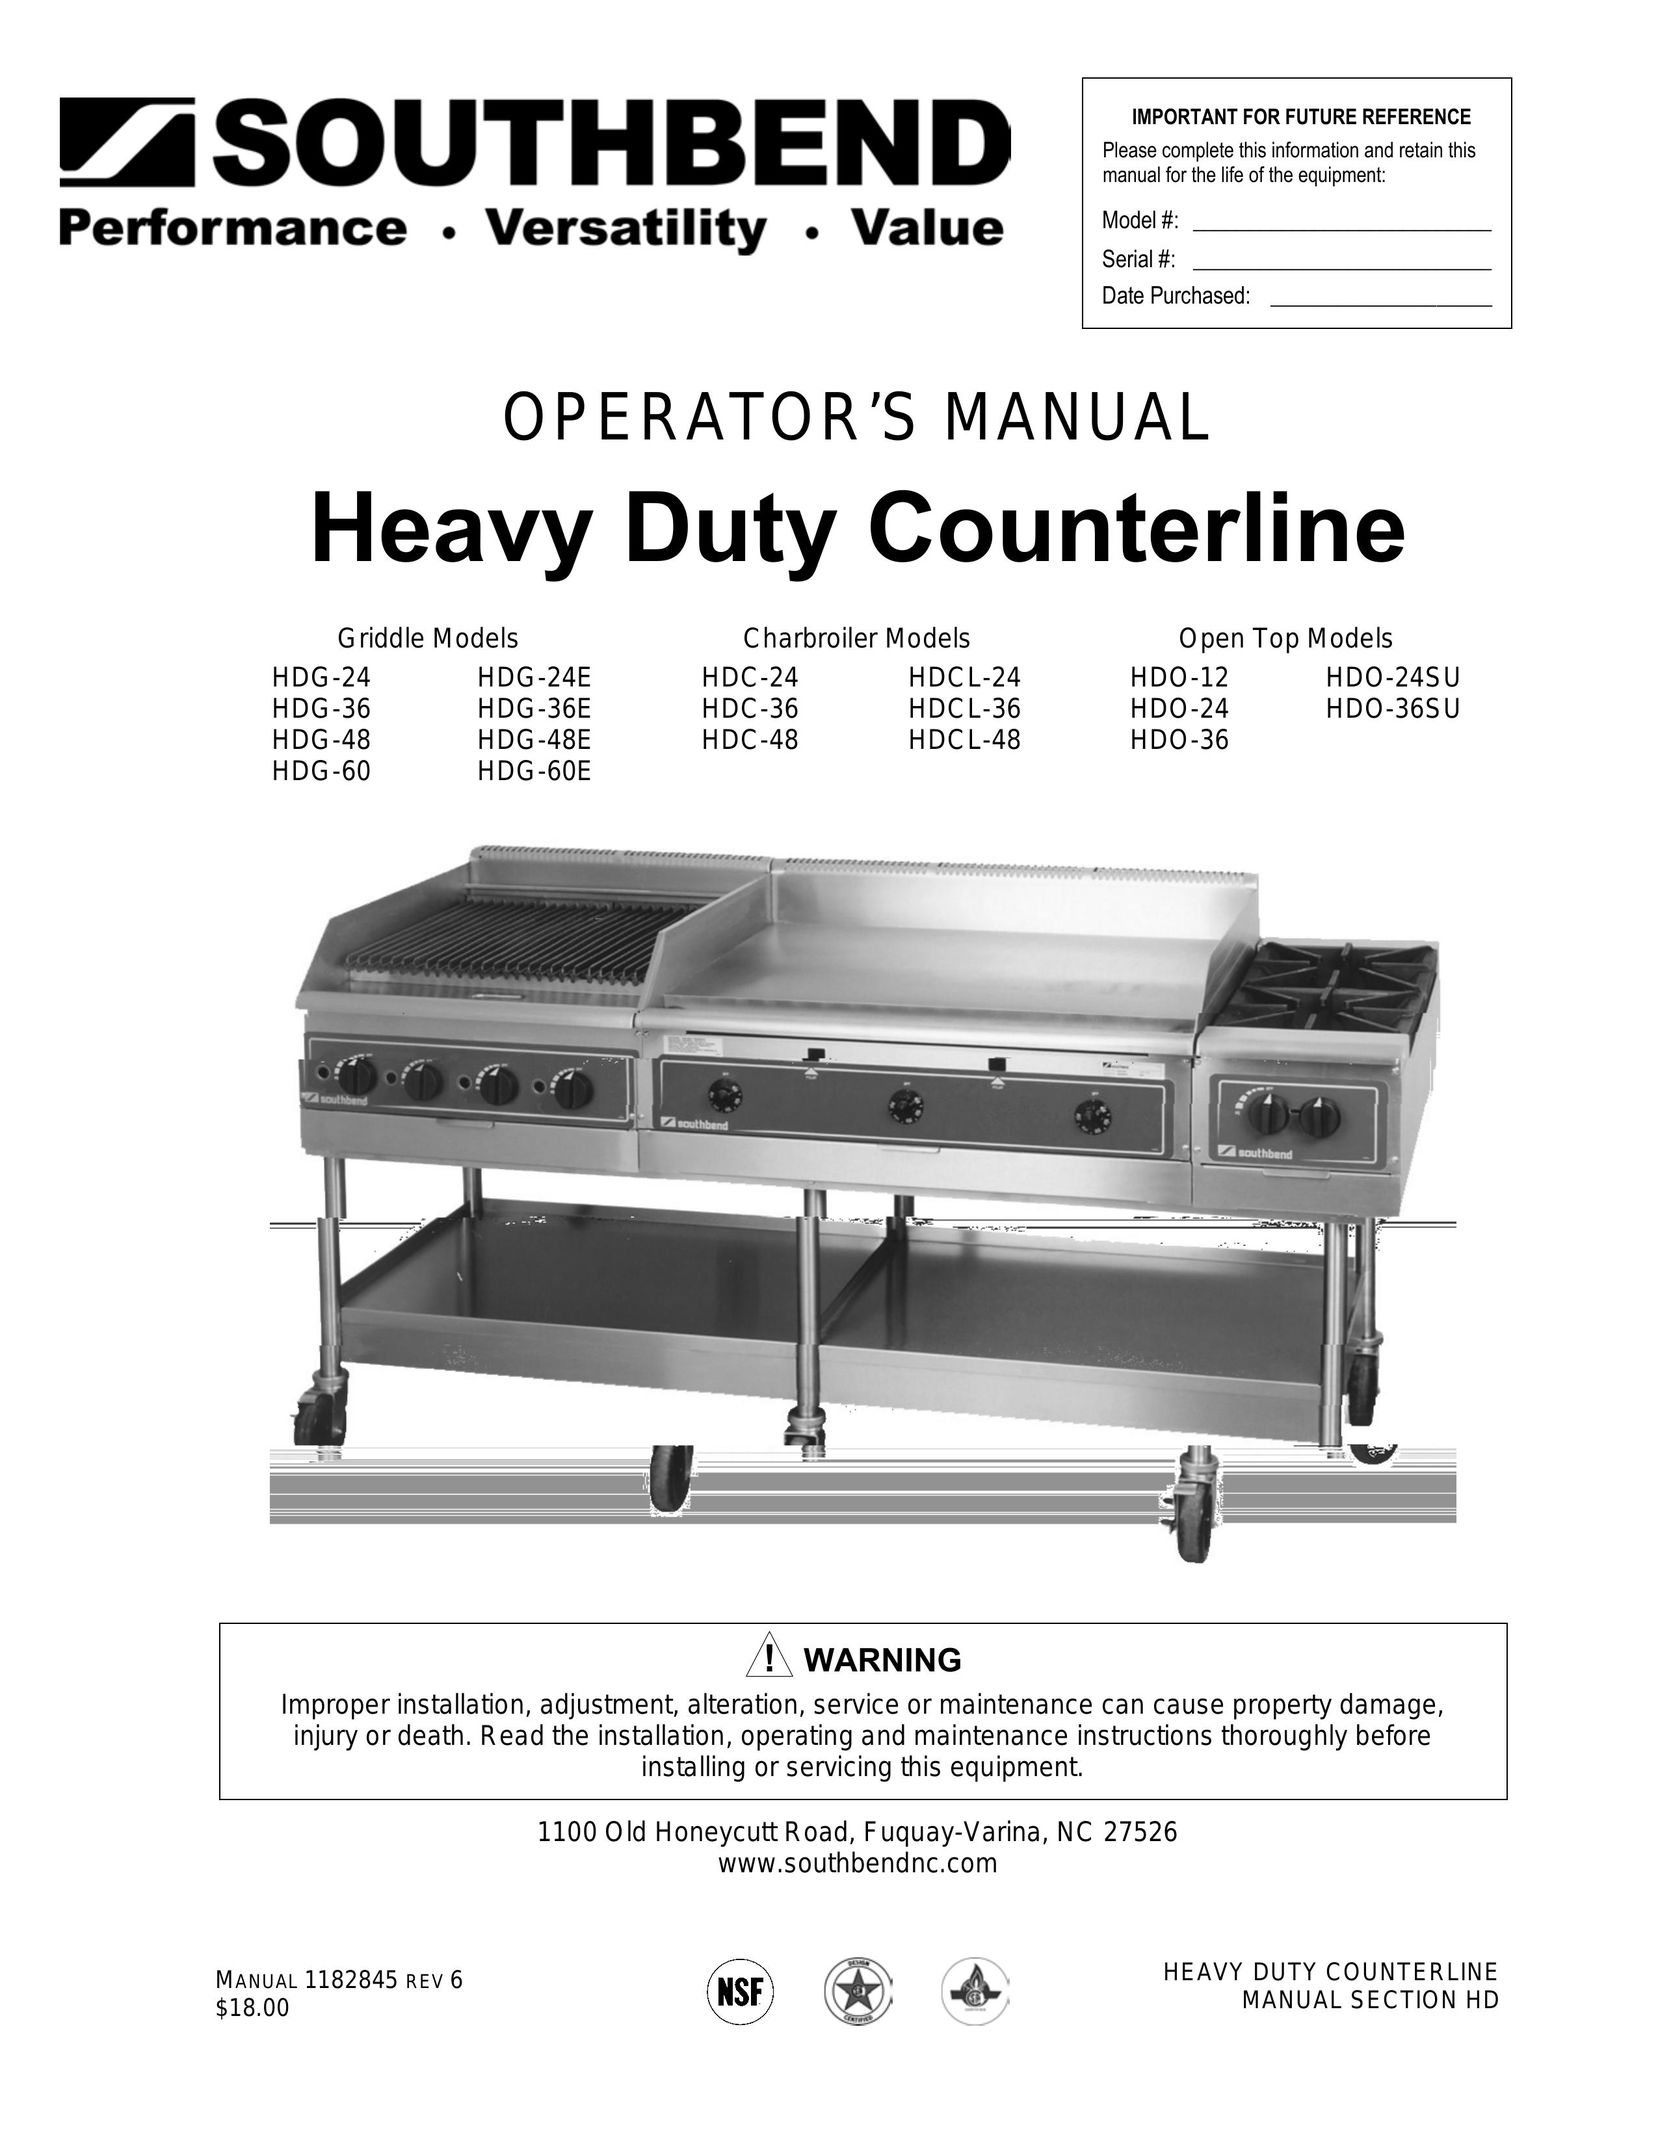 Southbend HDO-12 Cooktop User Manual